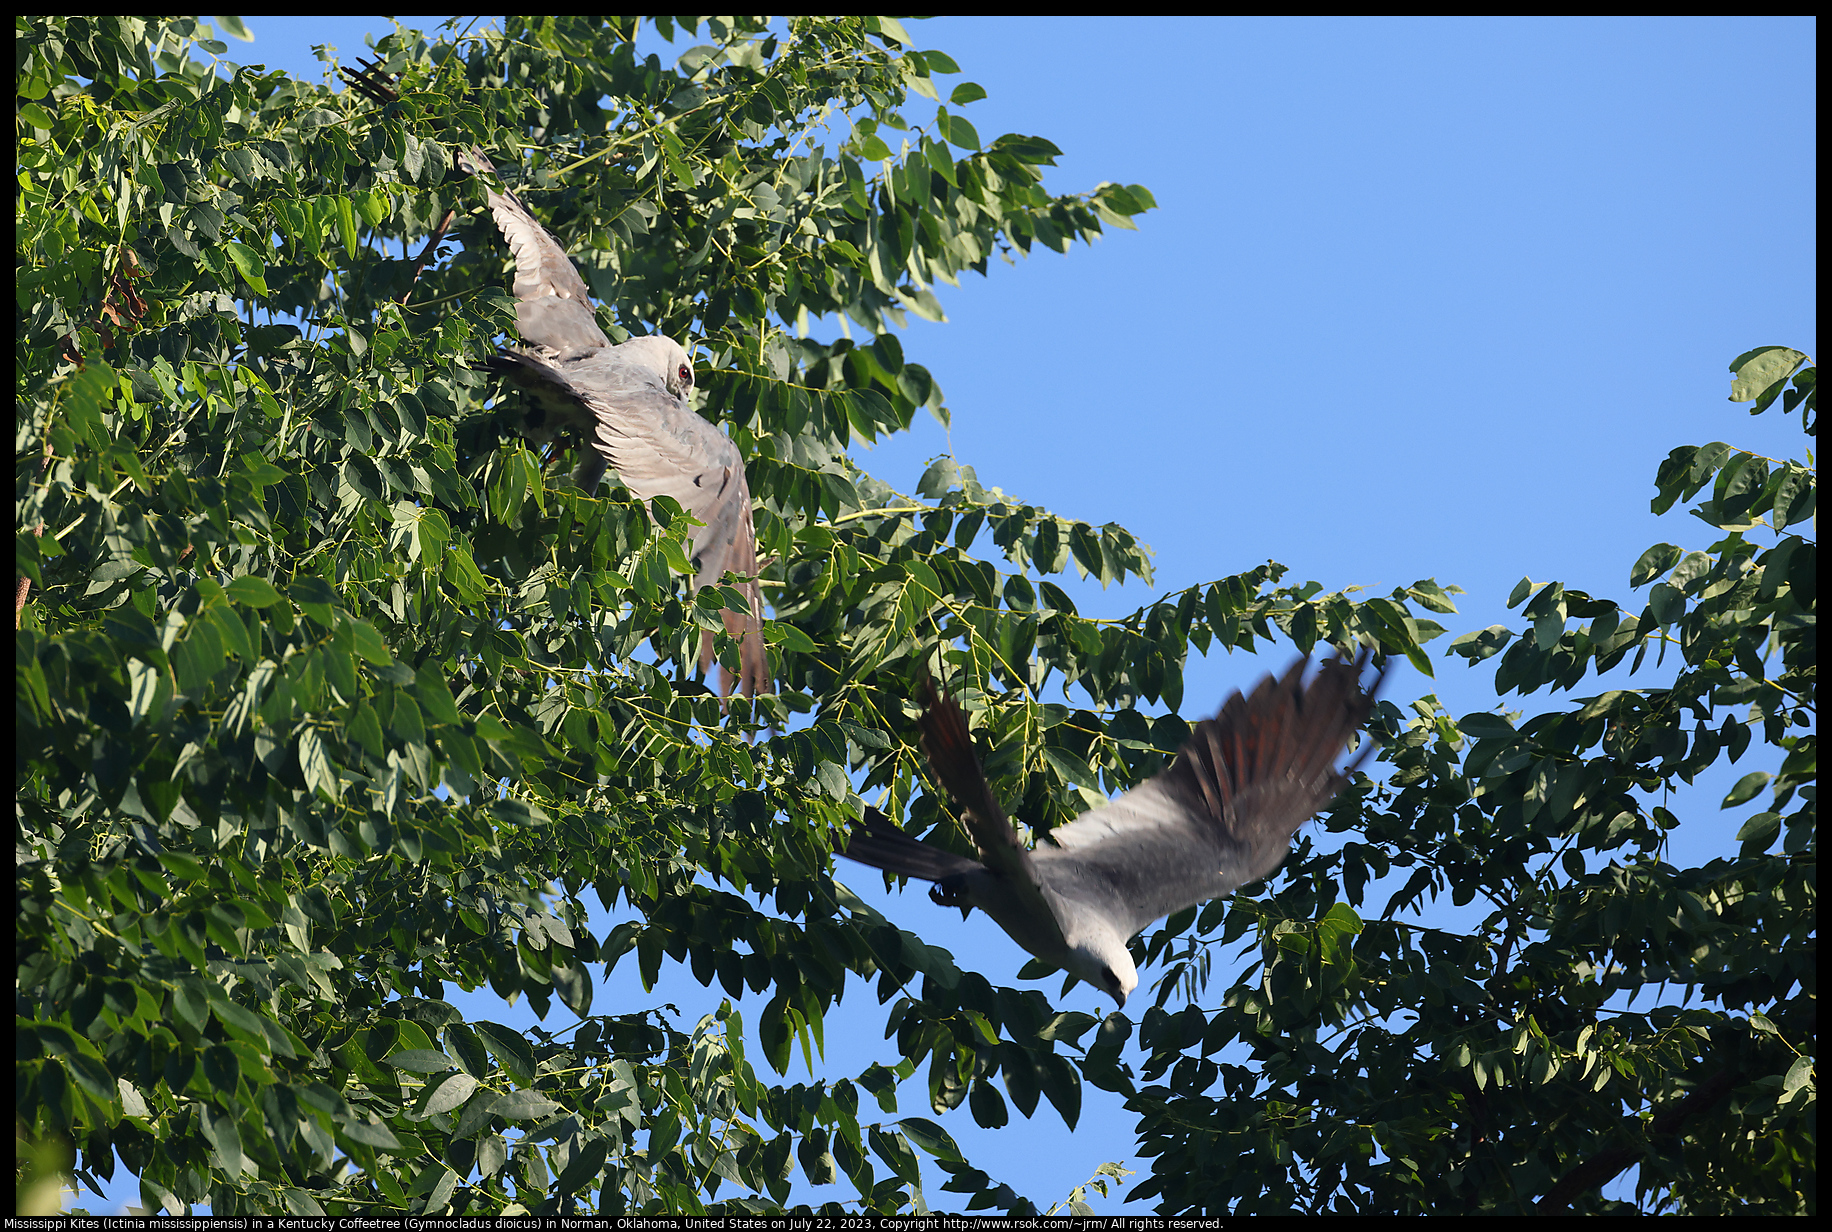 Mississippi Kites (Ictinia mississippiensis) in a Kentucky Coffeetree (Gymnocladus dioicus) in Norman, Oklahoma, United States on July 22, 2023